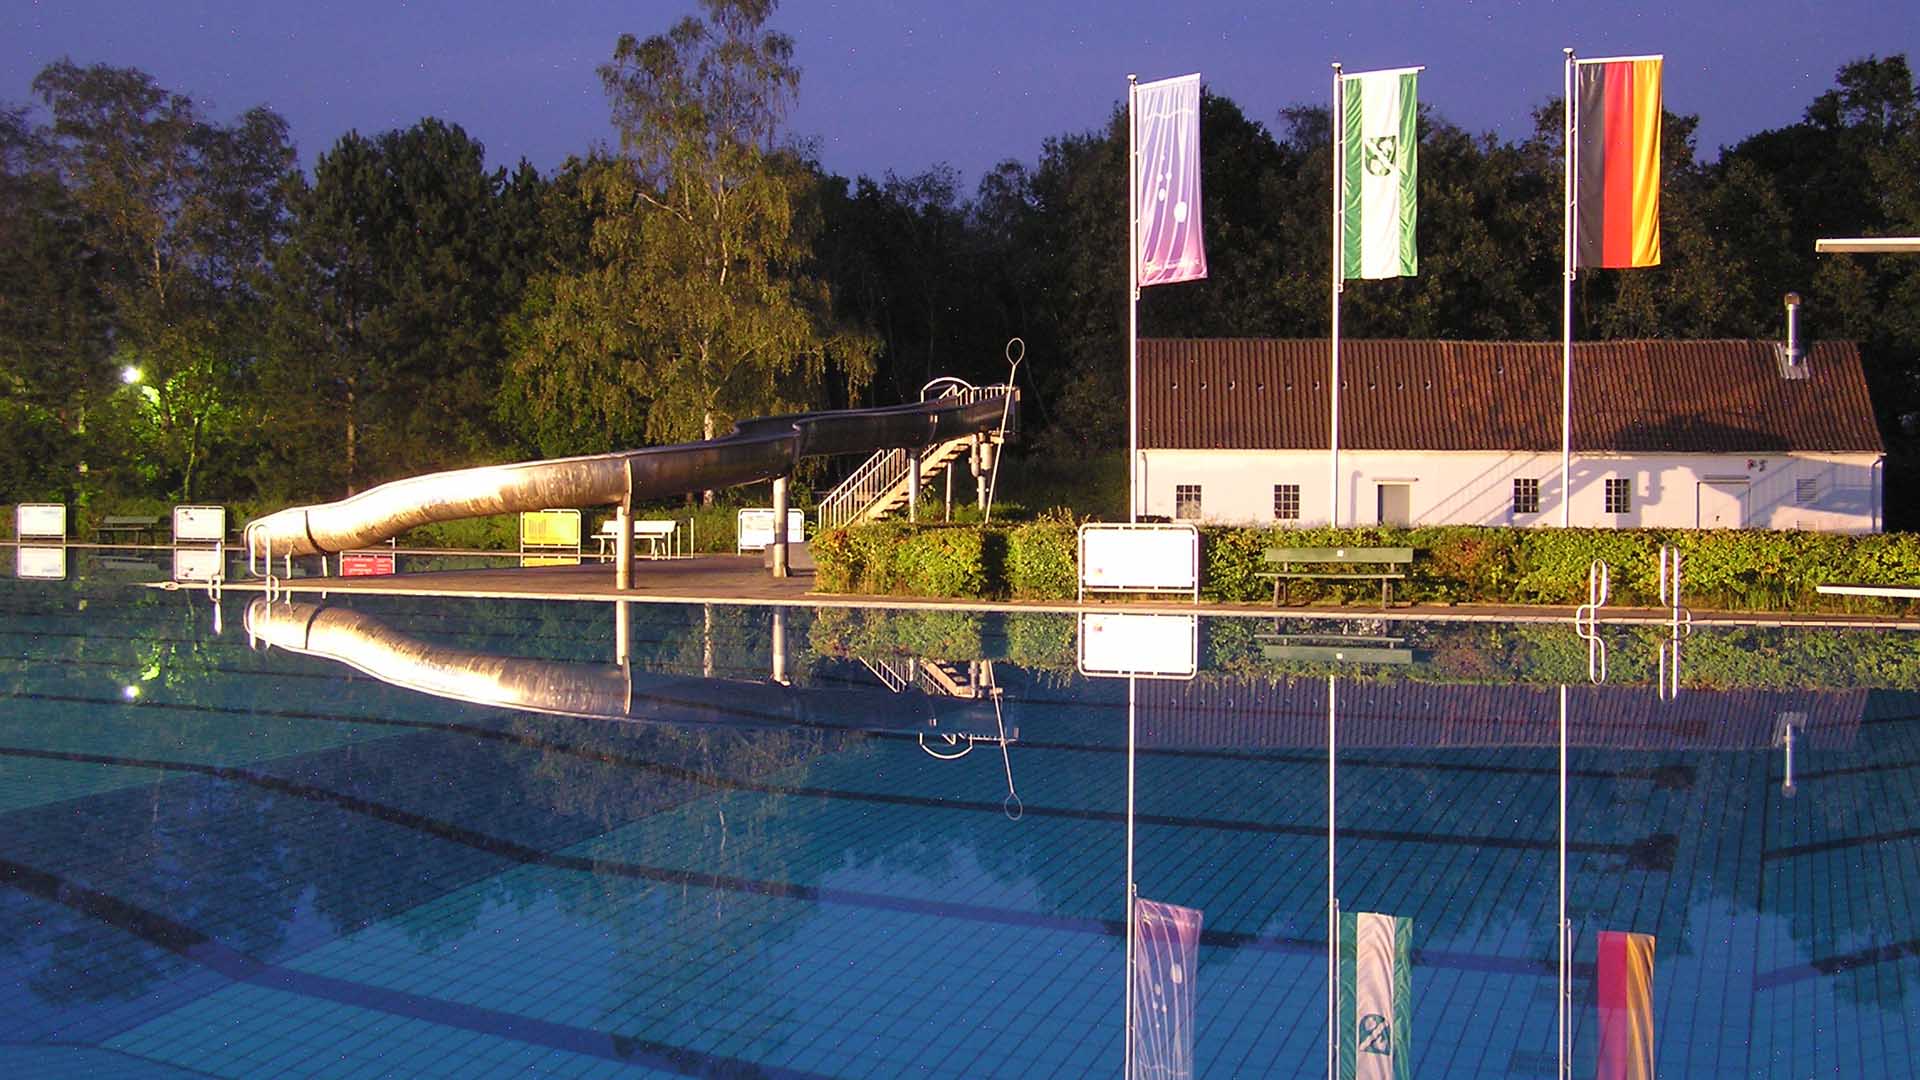 Evening atmosphere at the Westercelle Open Air Pool